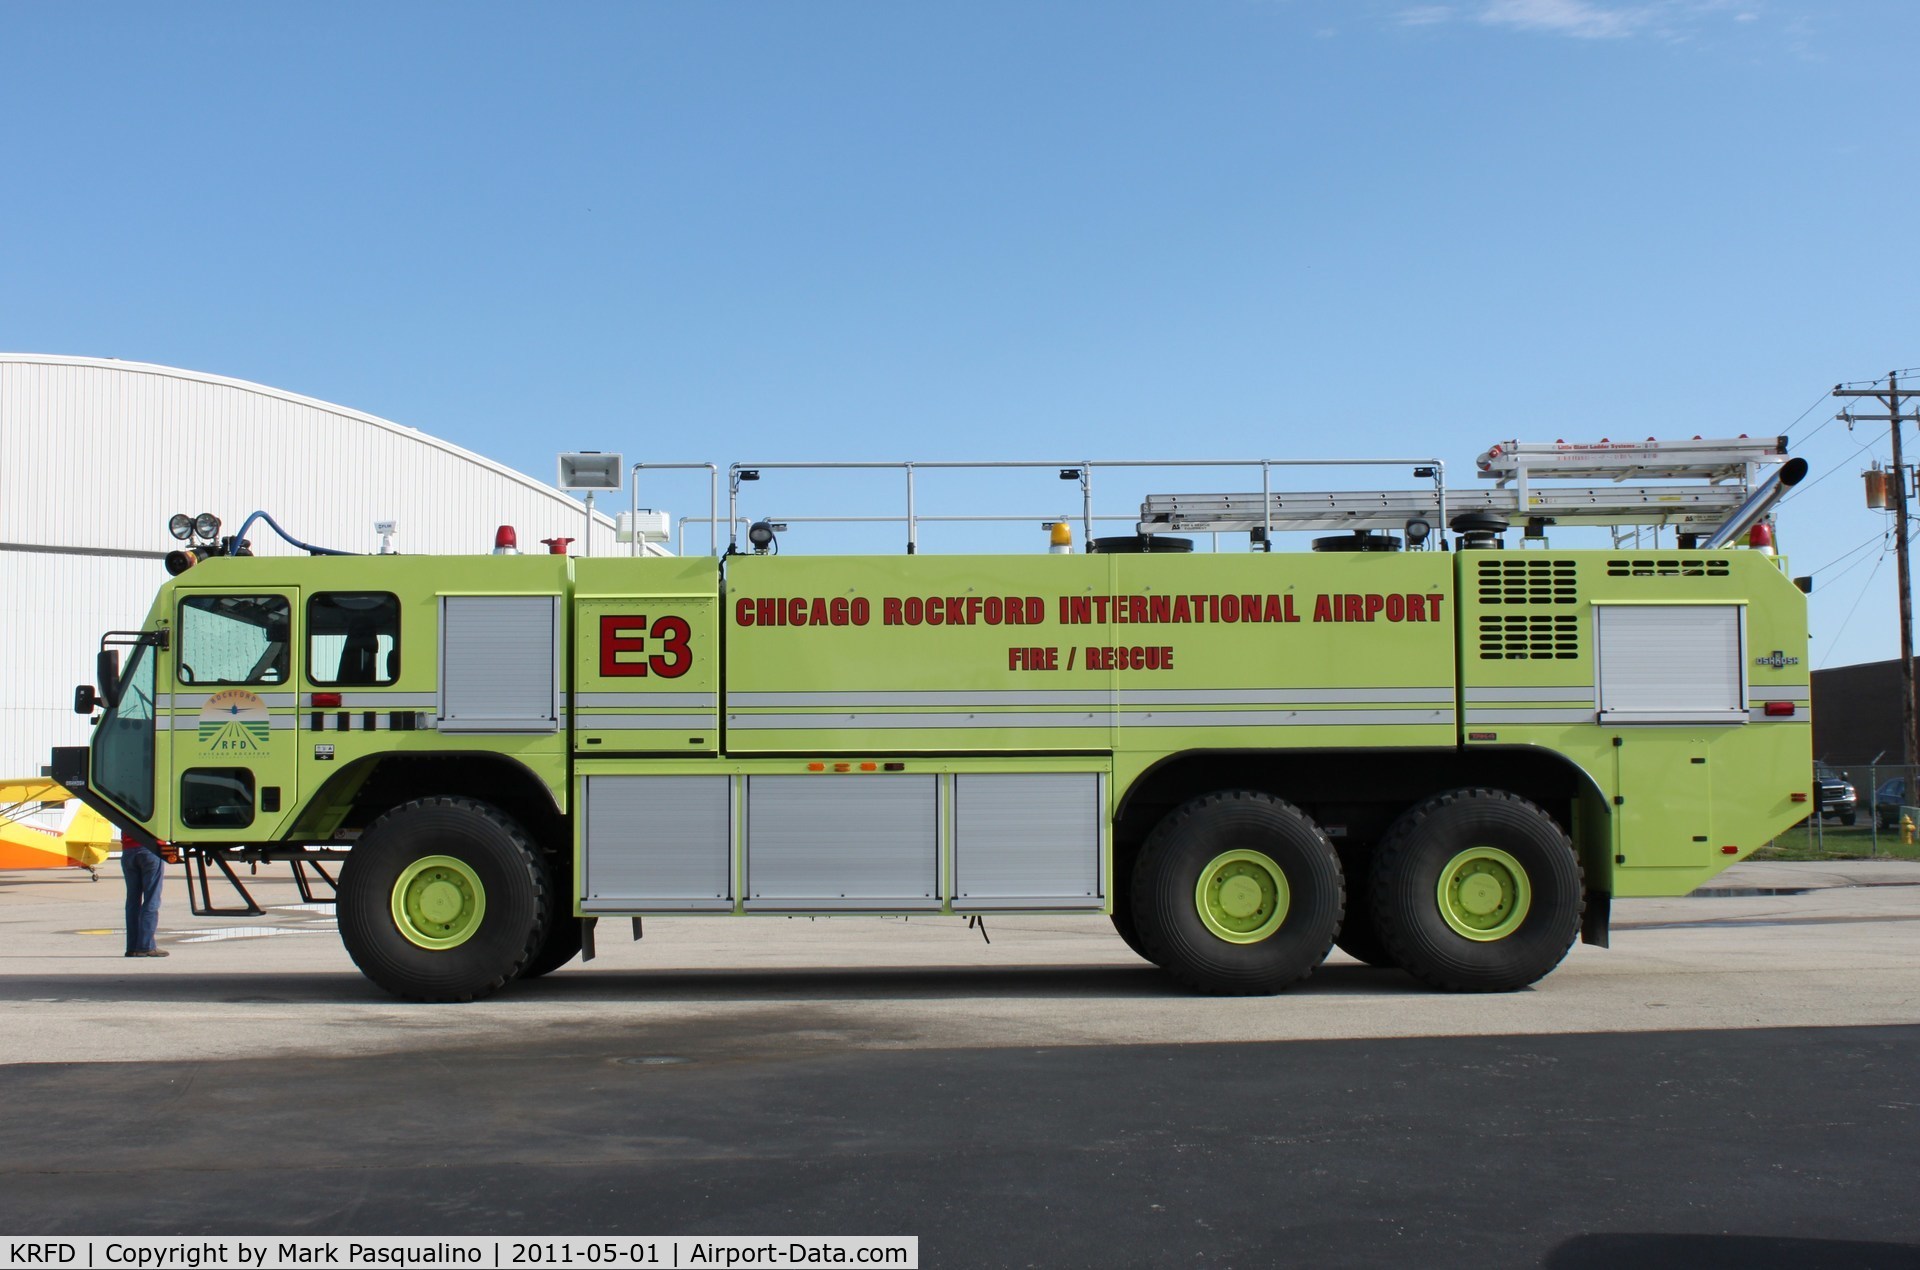 Chicago/rockford International Airport (RFD) - Fire/Rescue